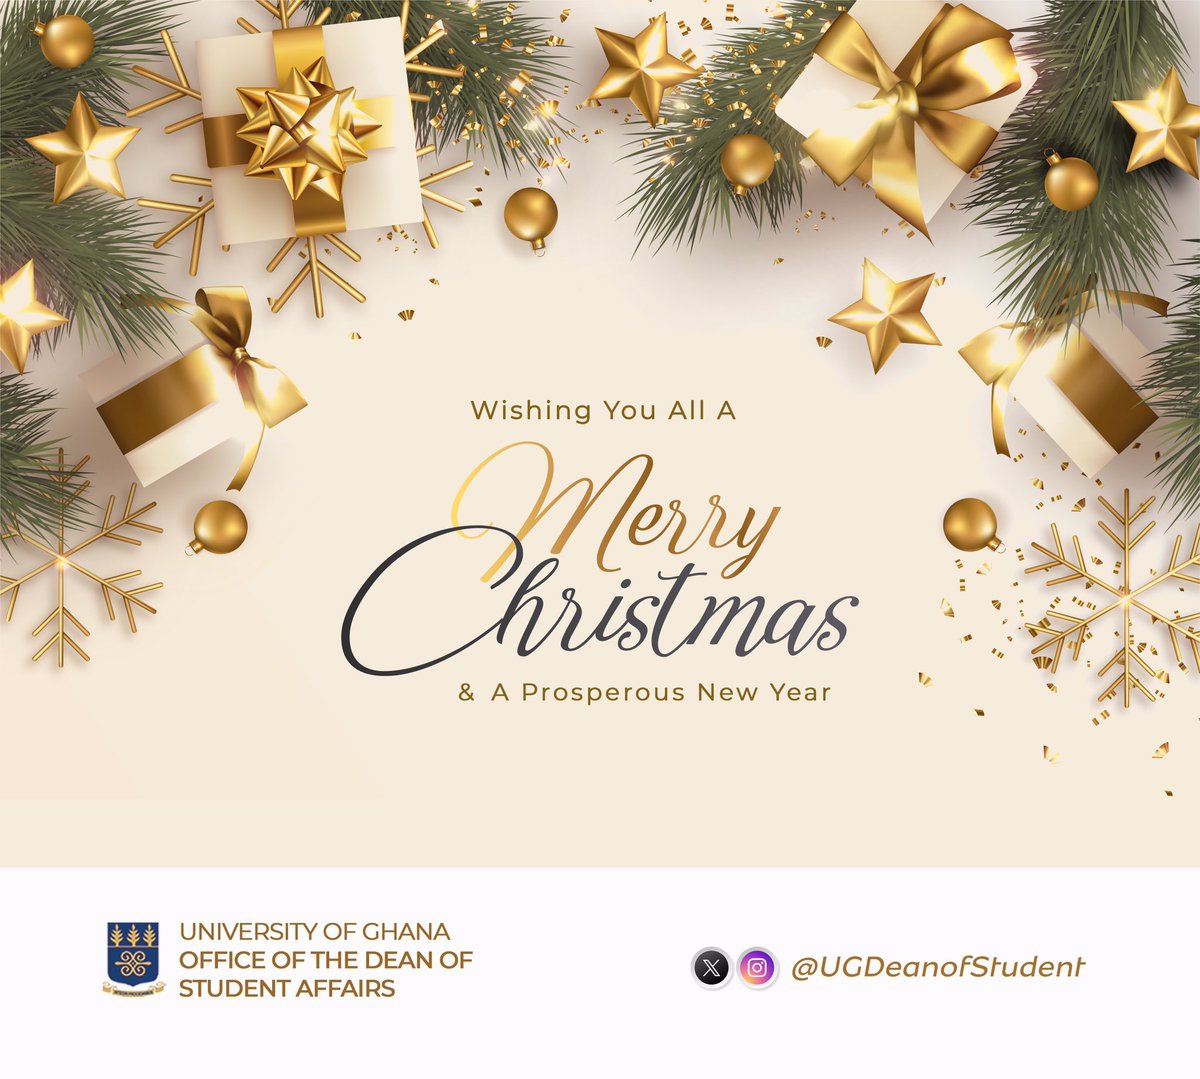 Wishing you all joy, peace, and unforgettable moments with your loved ones. Enjoy the well-deserved break, recharge, and embrace the festive spirit. Looking forward to a fantastic year ahead. 

Merry Christmas! 

#MerryChristmas 
#IntegriProcedamus